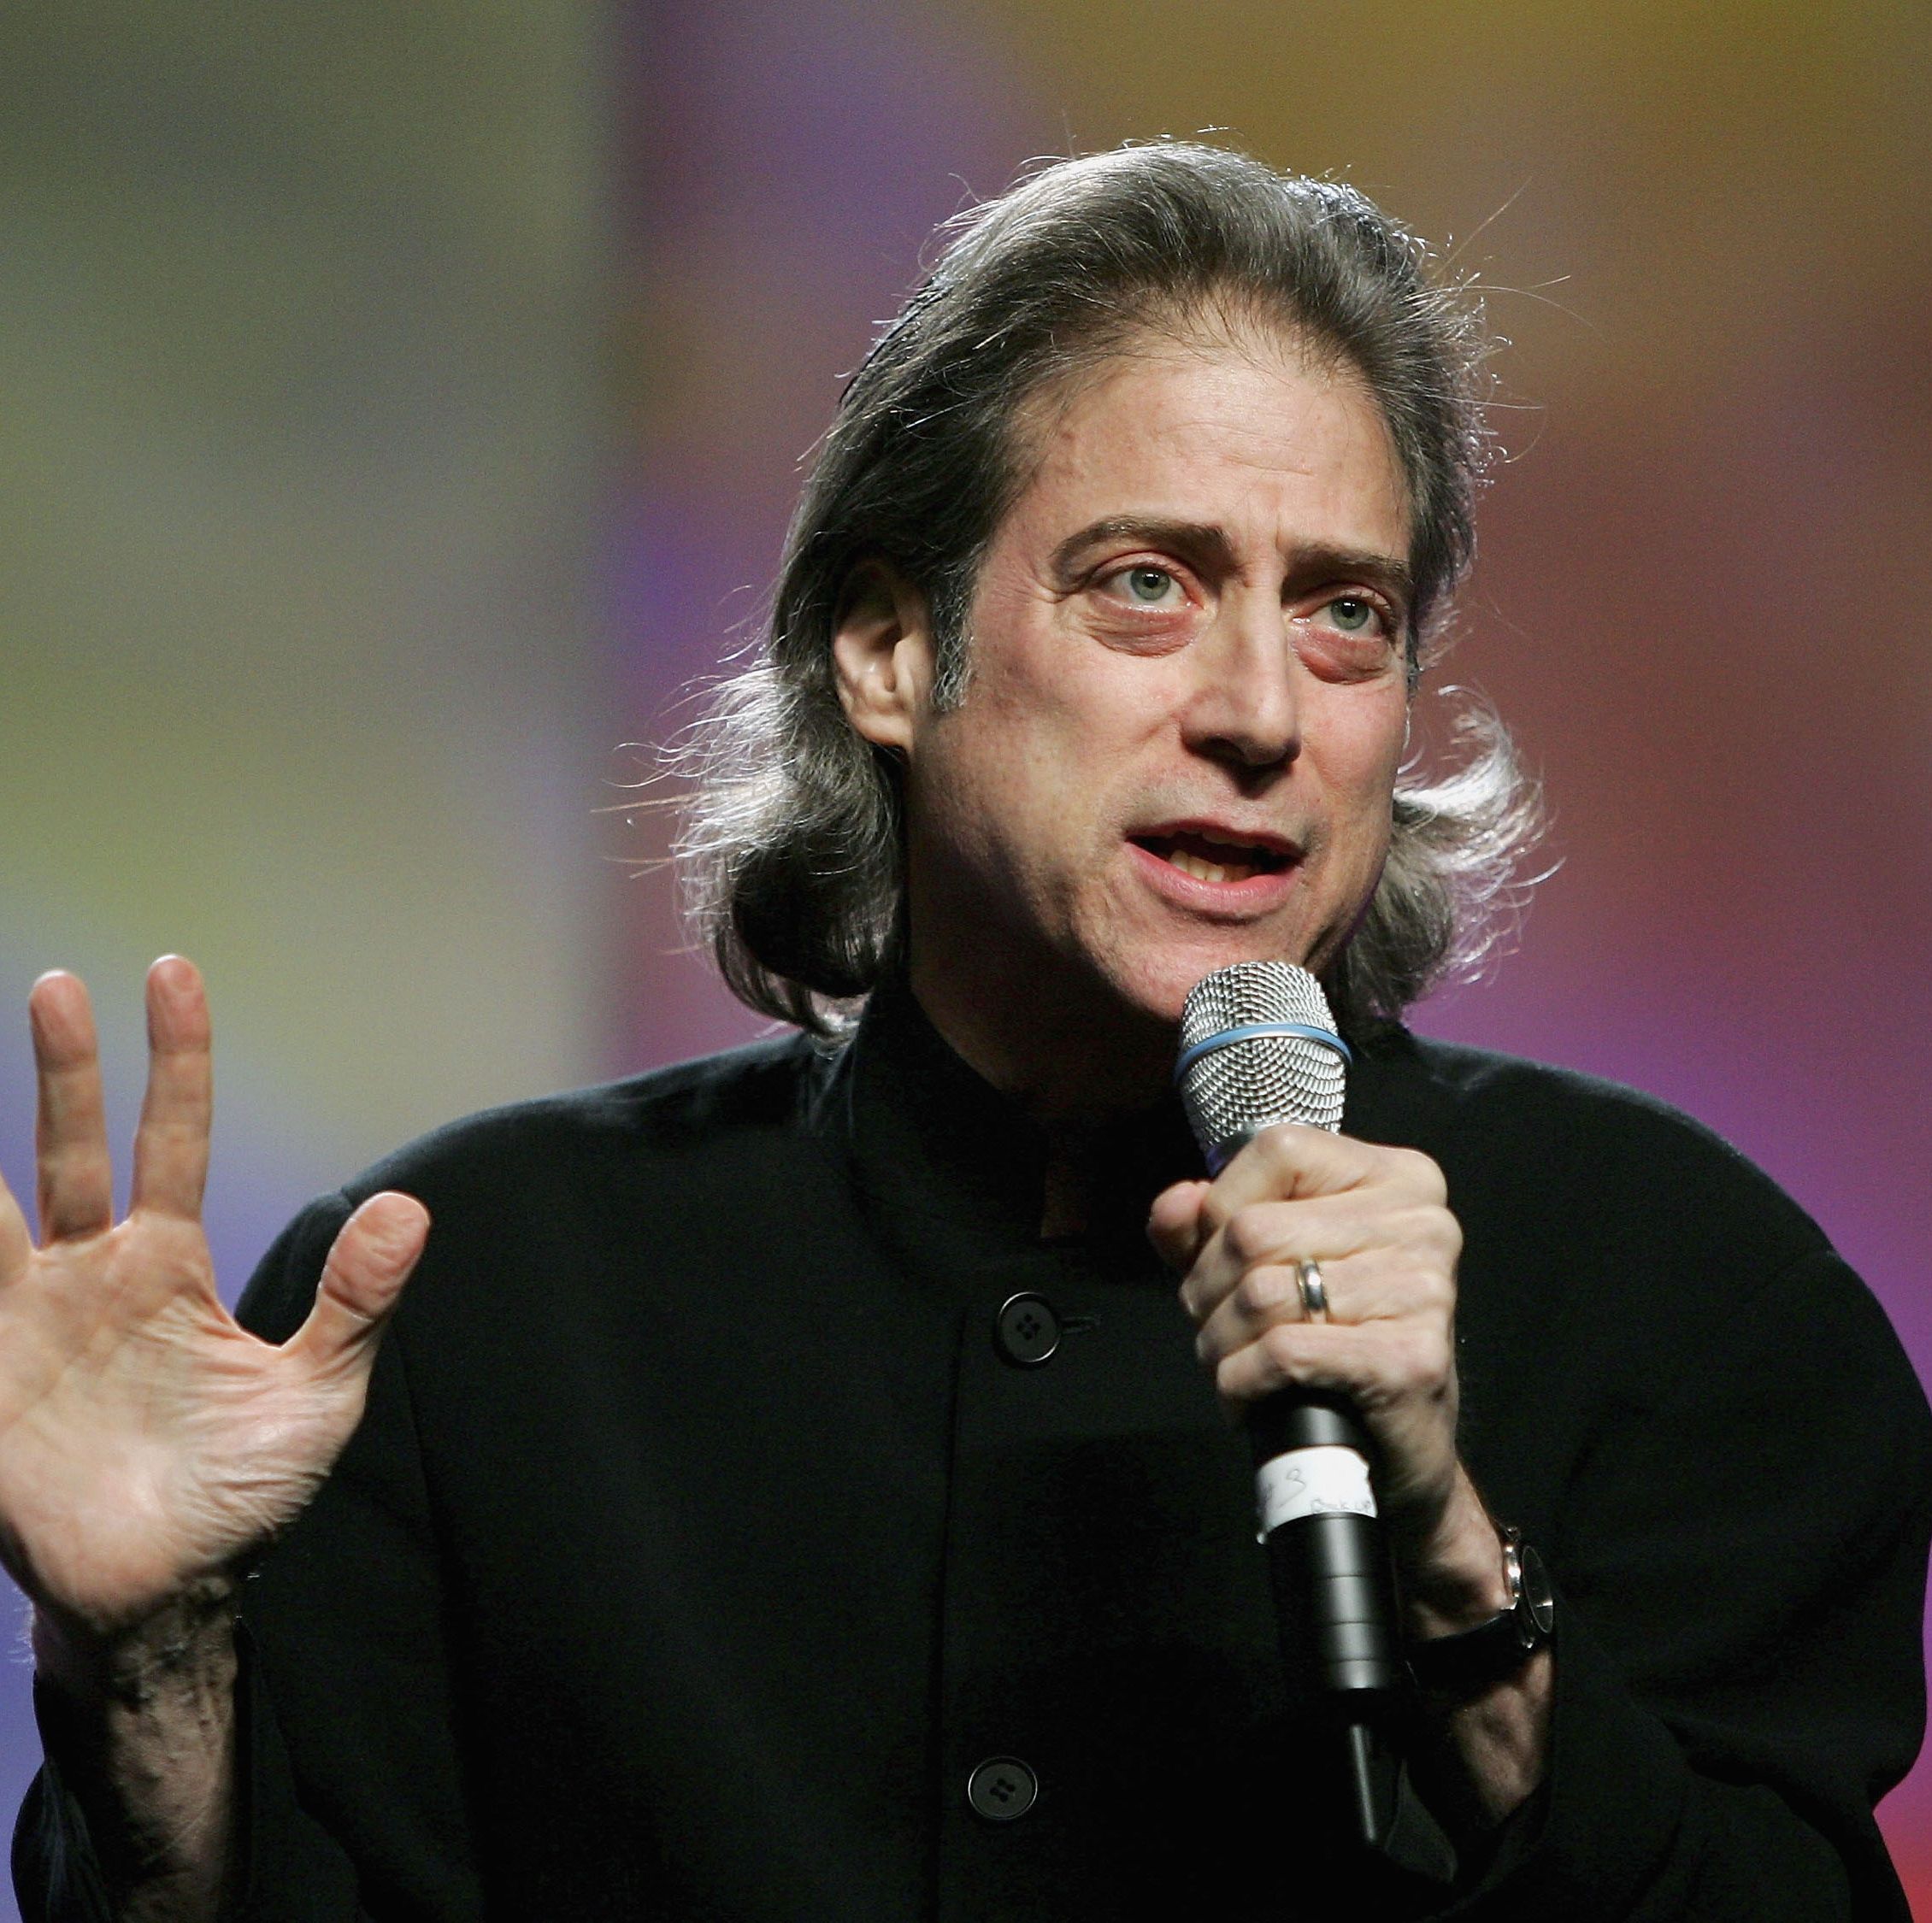 Richard Lewis Was the King of Self-Deprecating Comedy